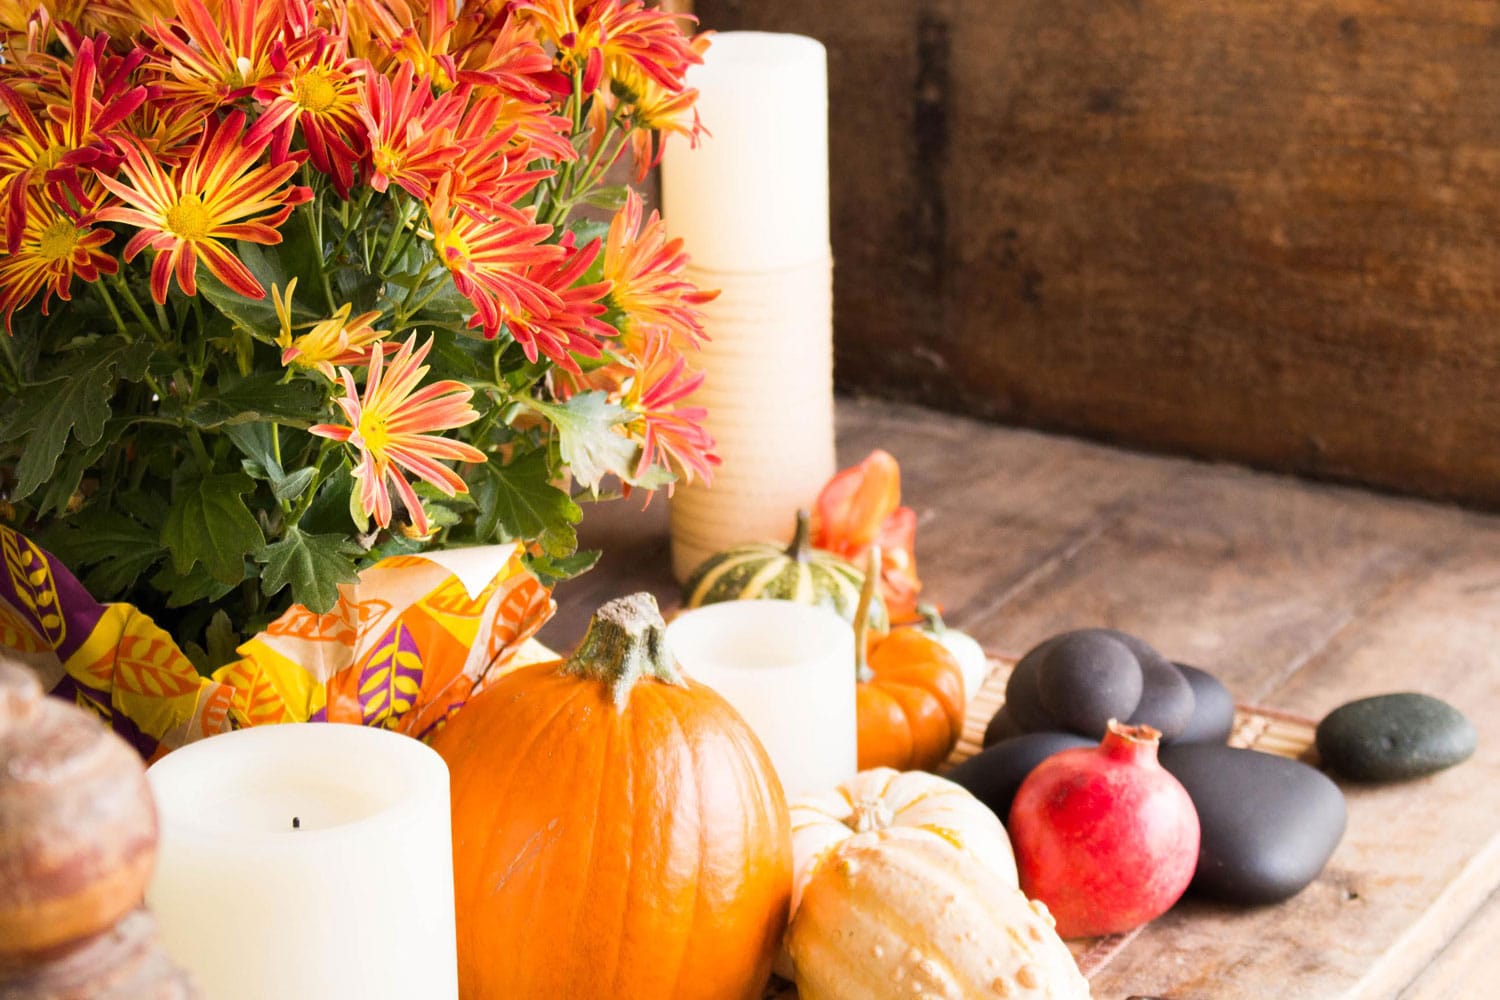 Image of spa stones, a pomegranate, pumpkins and squashes, candles, and orange flowers on a wooden floor.